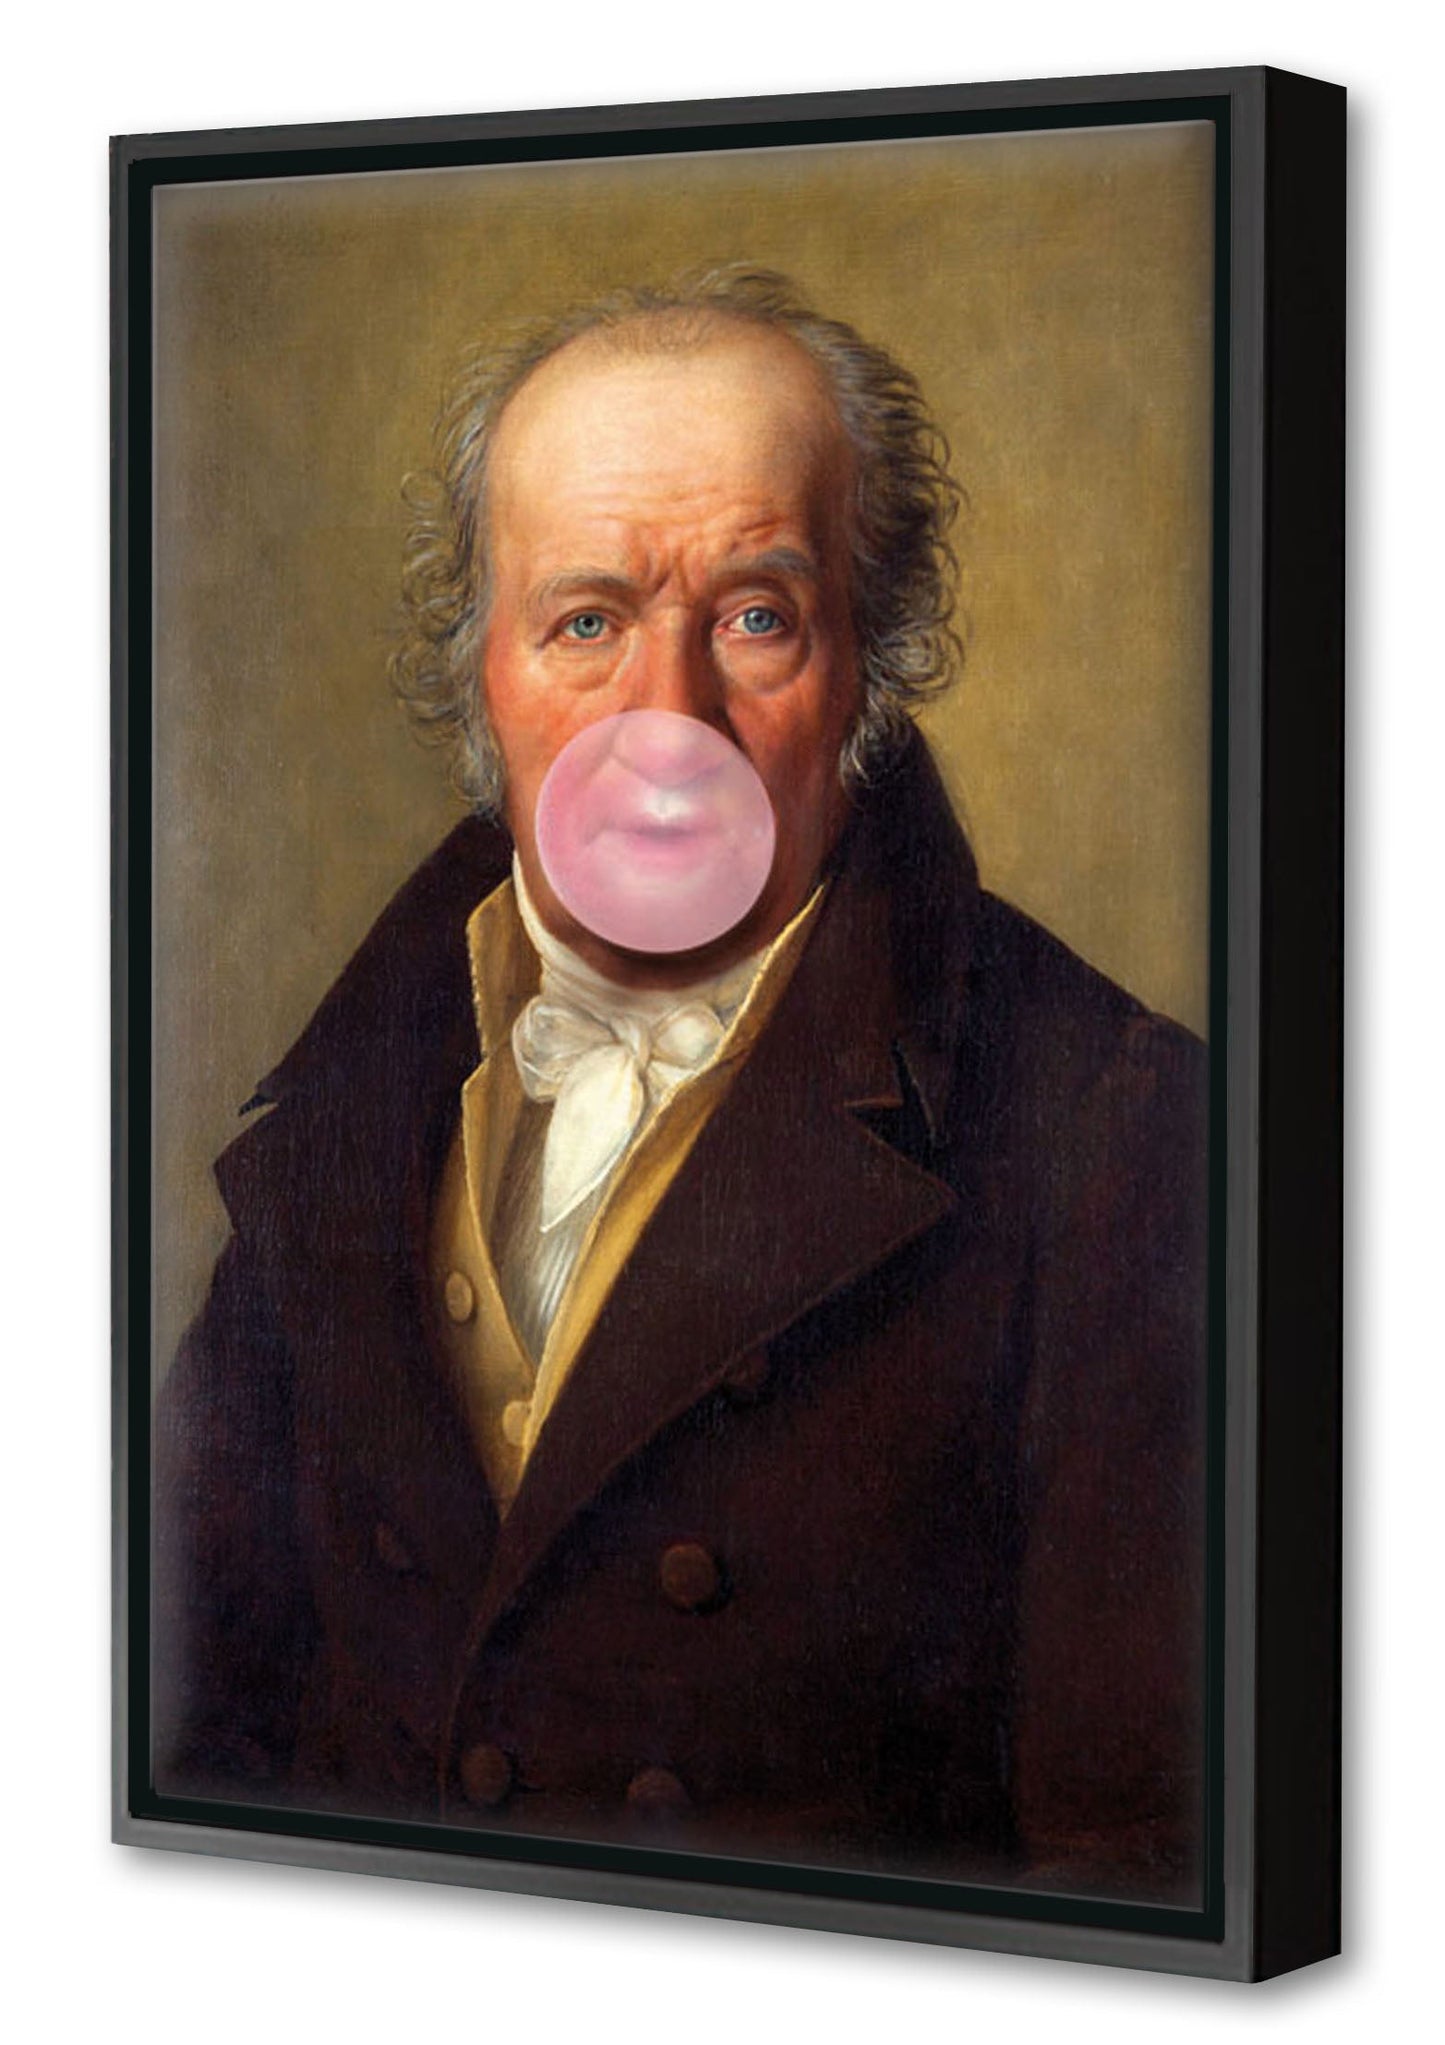 Chewing Gum #2-historical, print-Canvas Print with Box Frame-40 x 60 cm-BLUE SHAKER